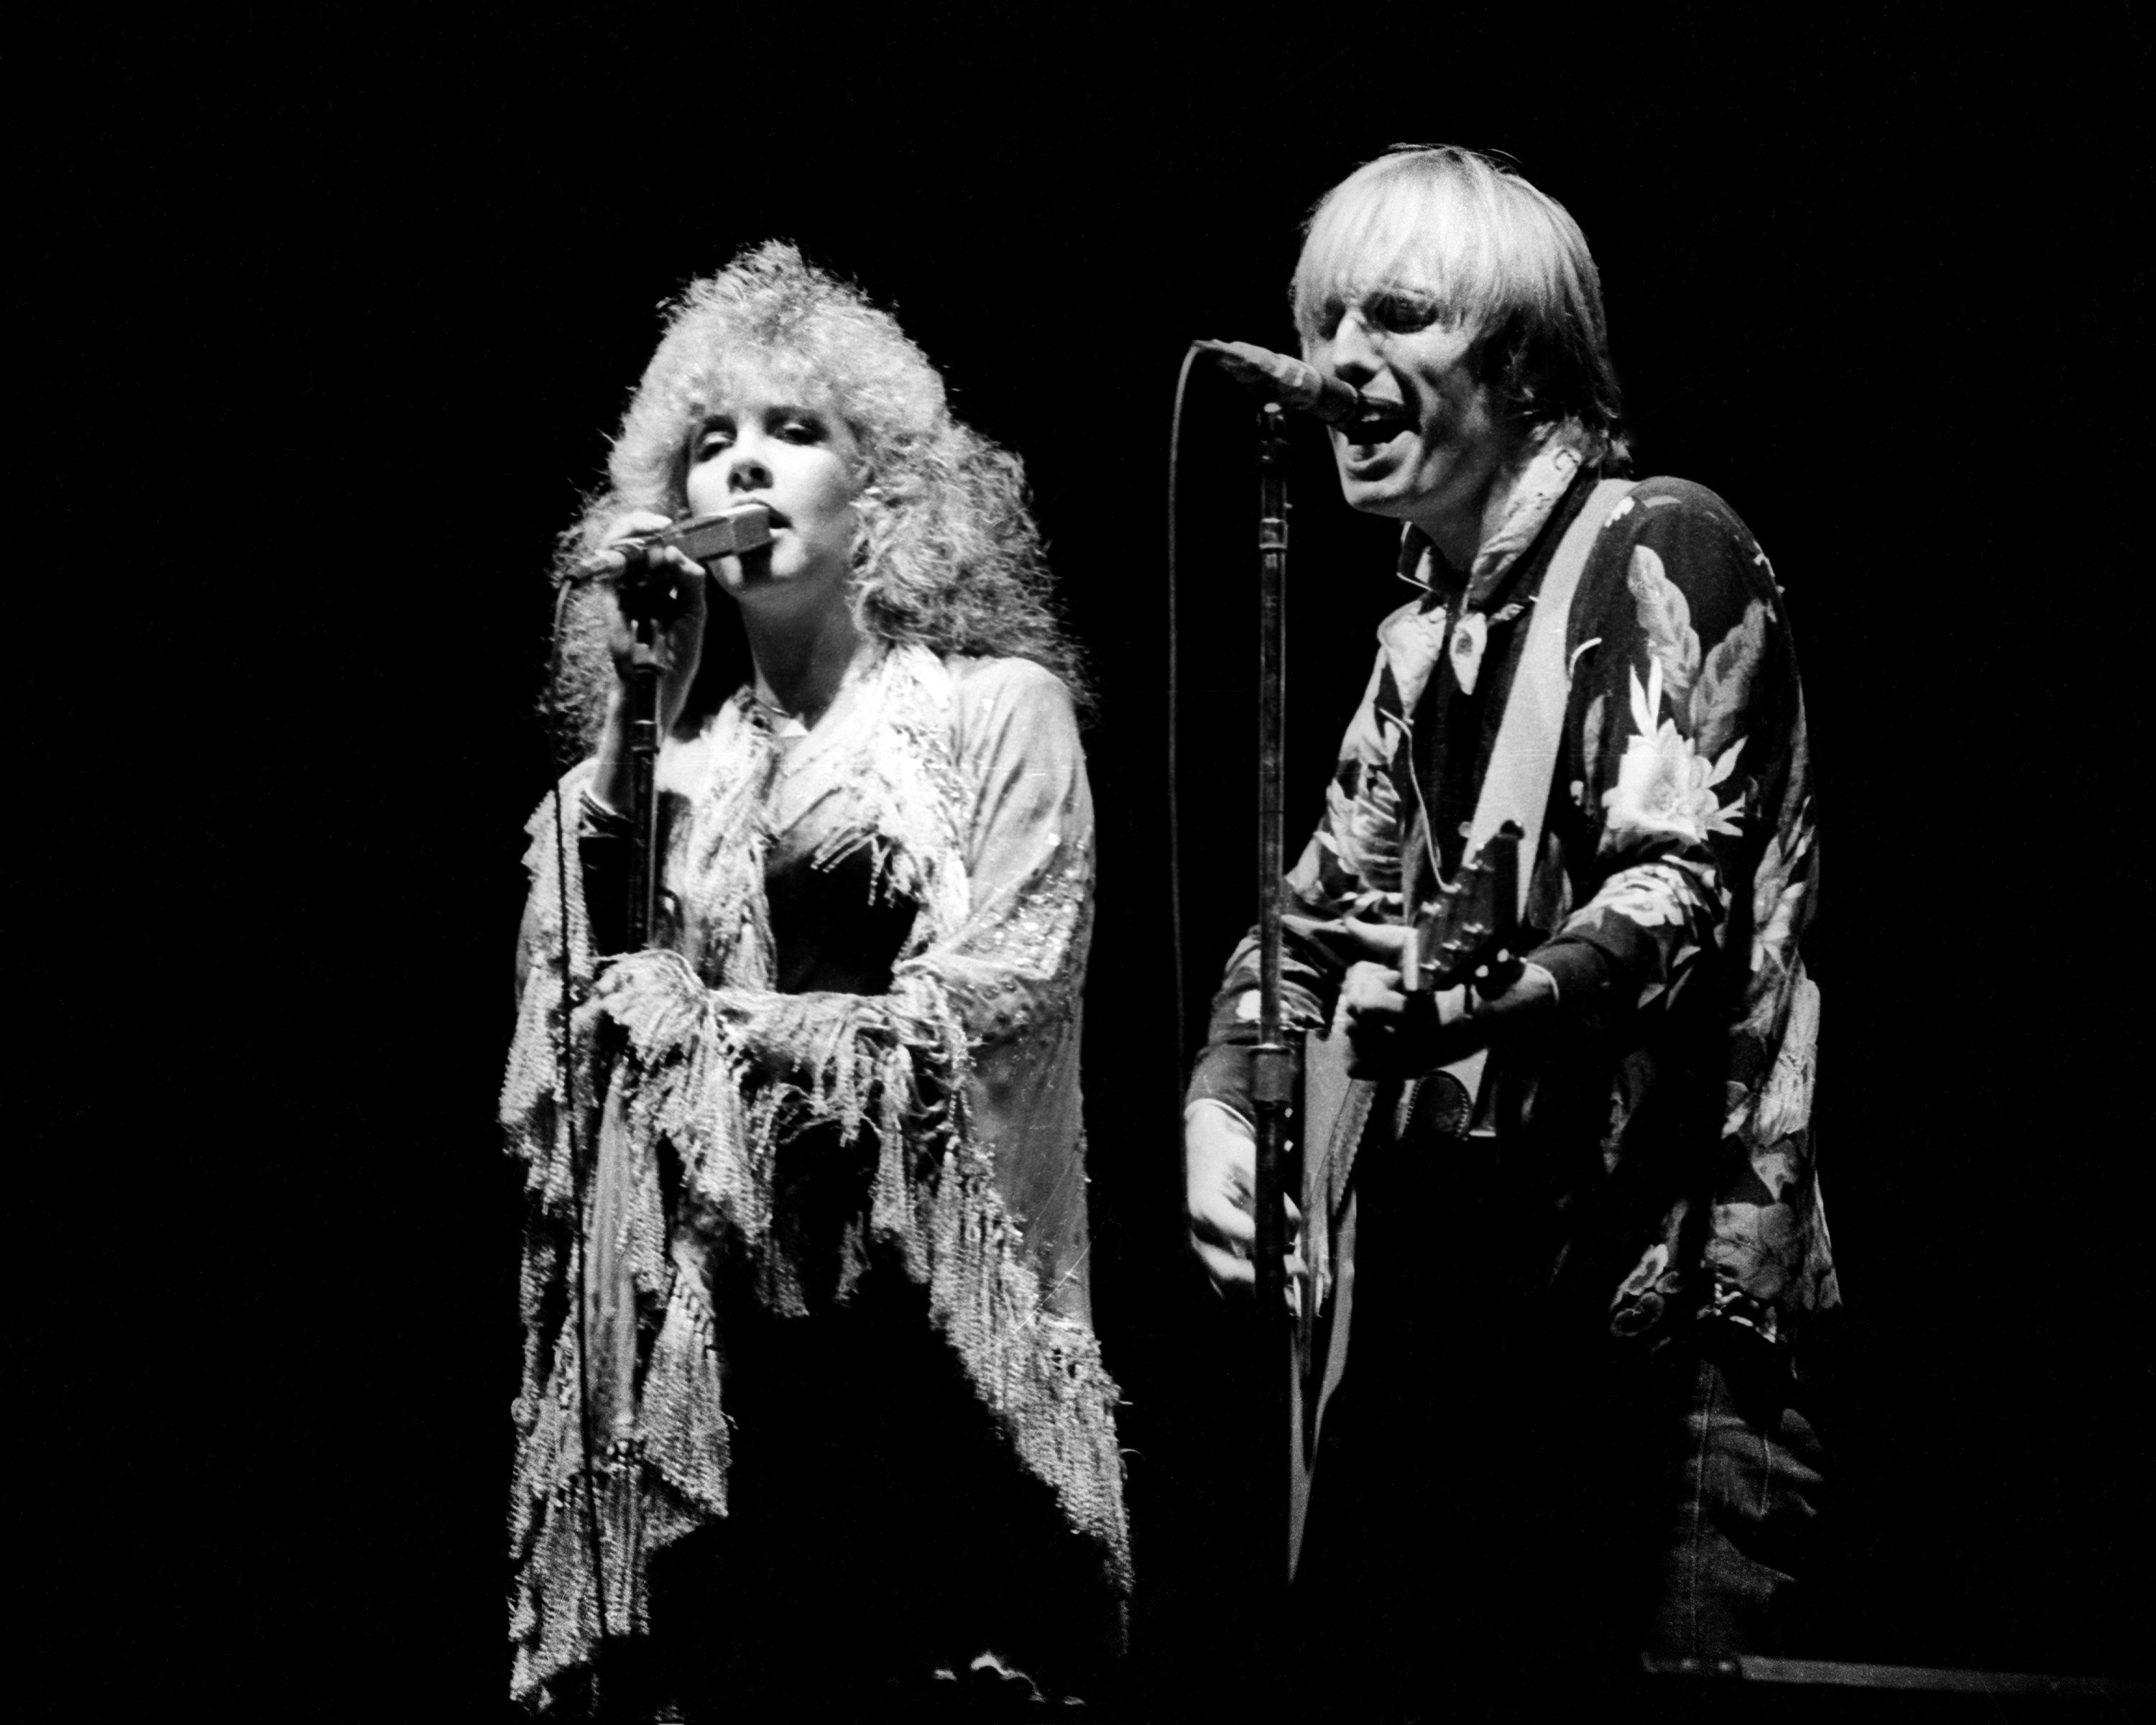 A black and white photo of Stevie Nicks and Tom Petty singing into microphones together.